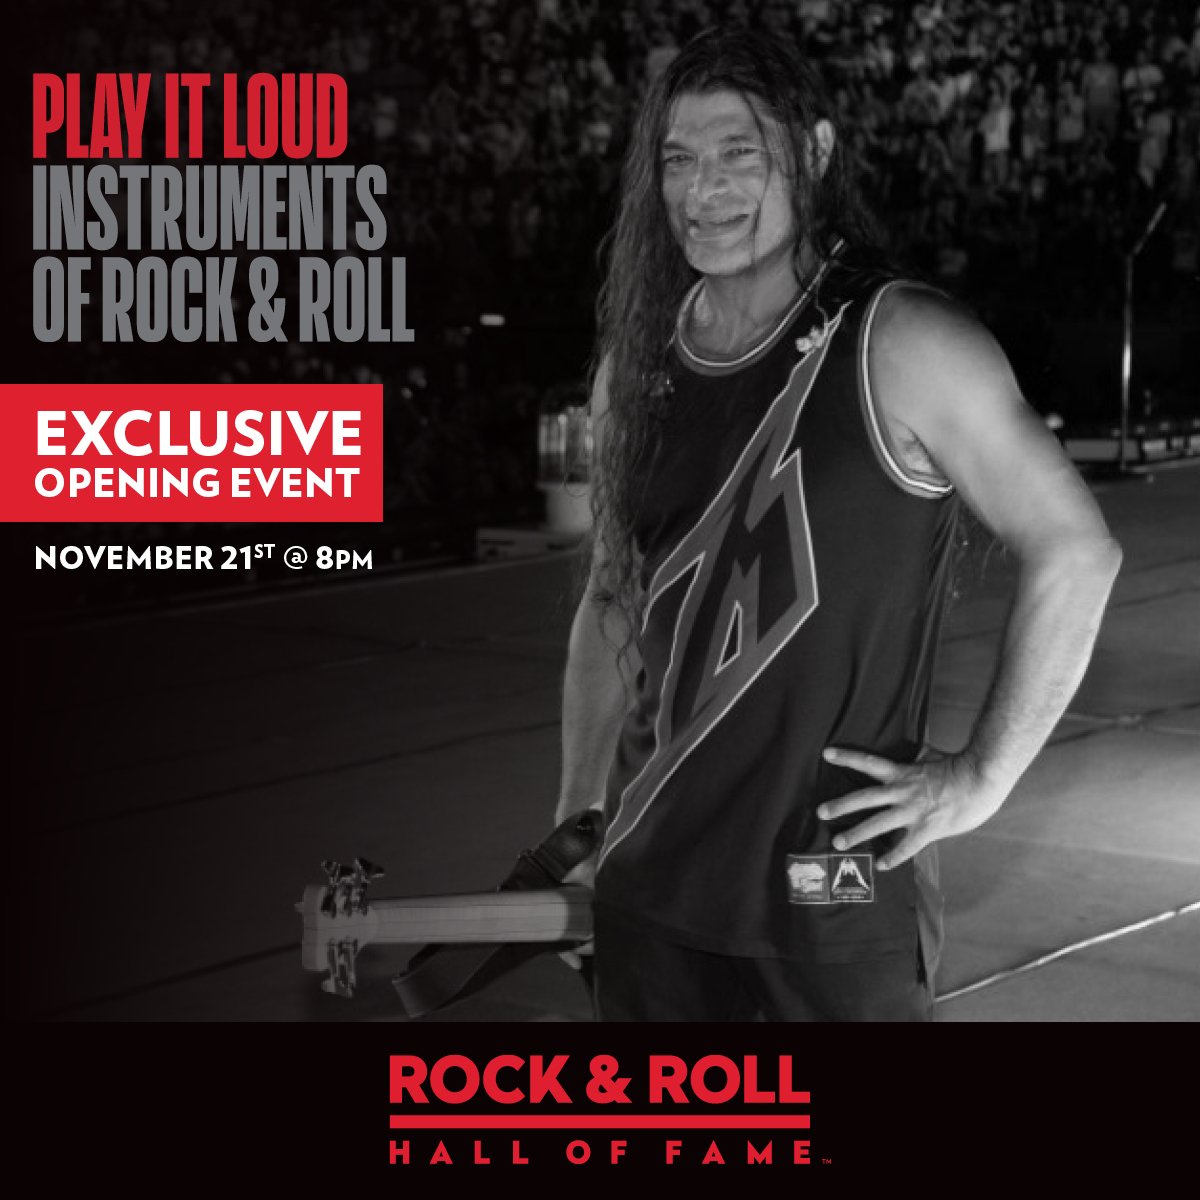 Play It Loud, an exhibit celebrating the iconic musical instruments that gave rock & roll its signature sound, comes to the @rockhall! Join special Inductee guests, including @KirkHammett & @RobertTrujillo, for the grand opening on November 21! Get tix at rockhall.com/play-it-loud-e….